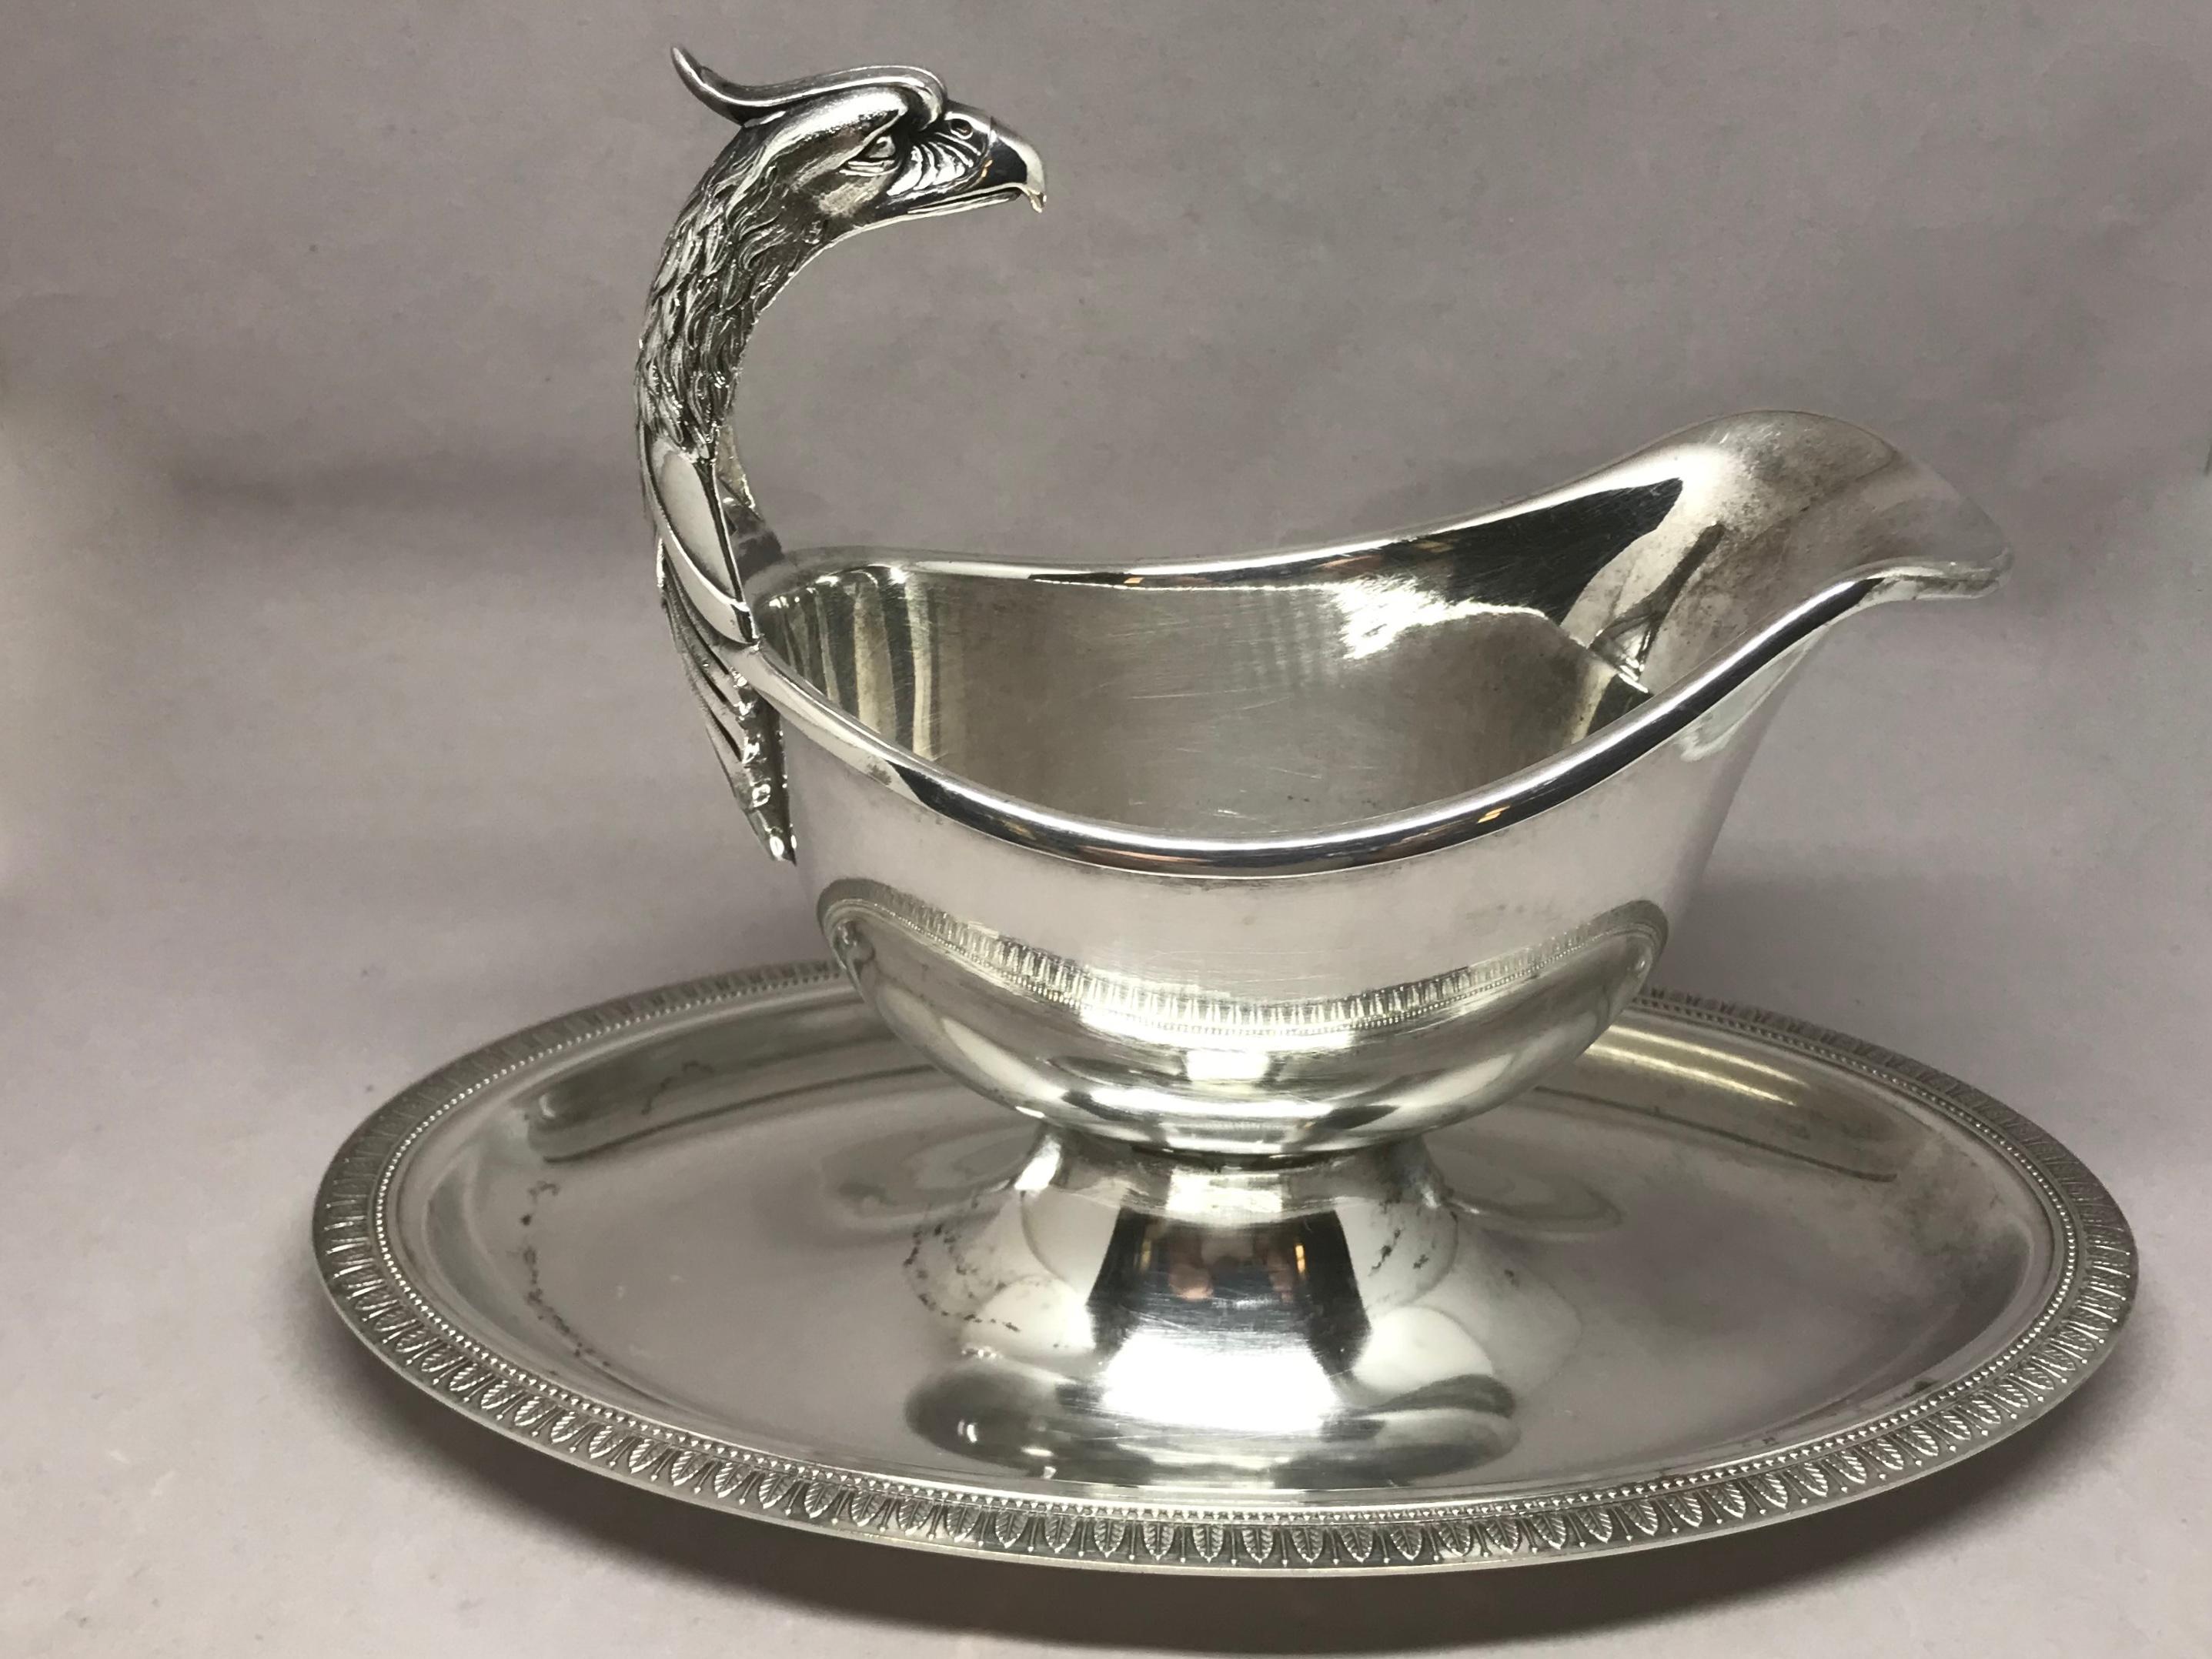 silver gravy boat with attached plate